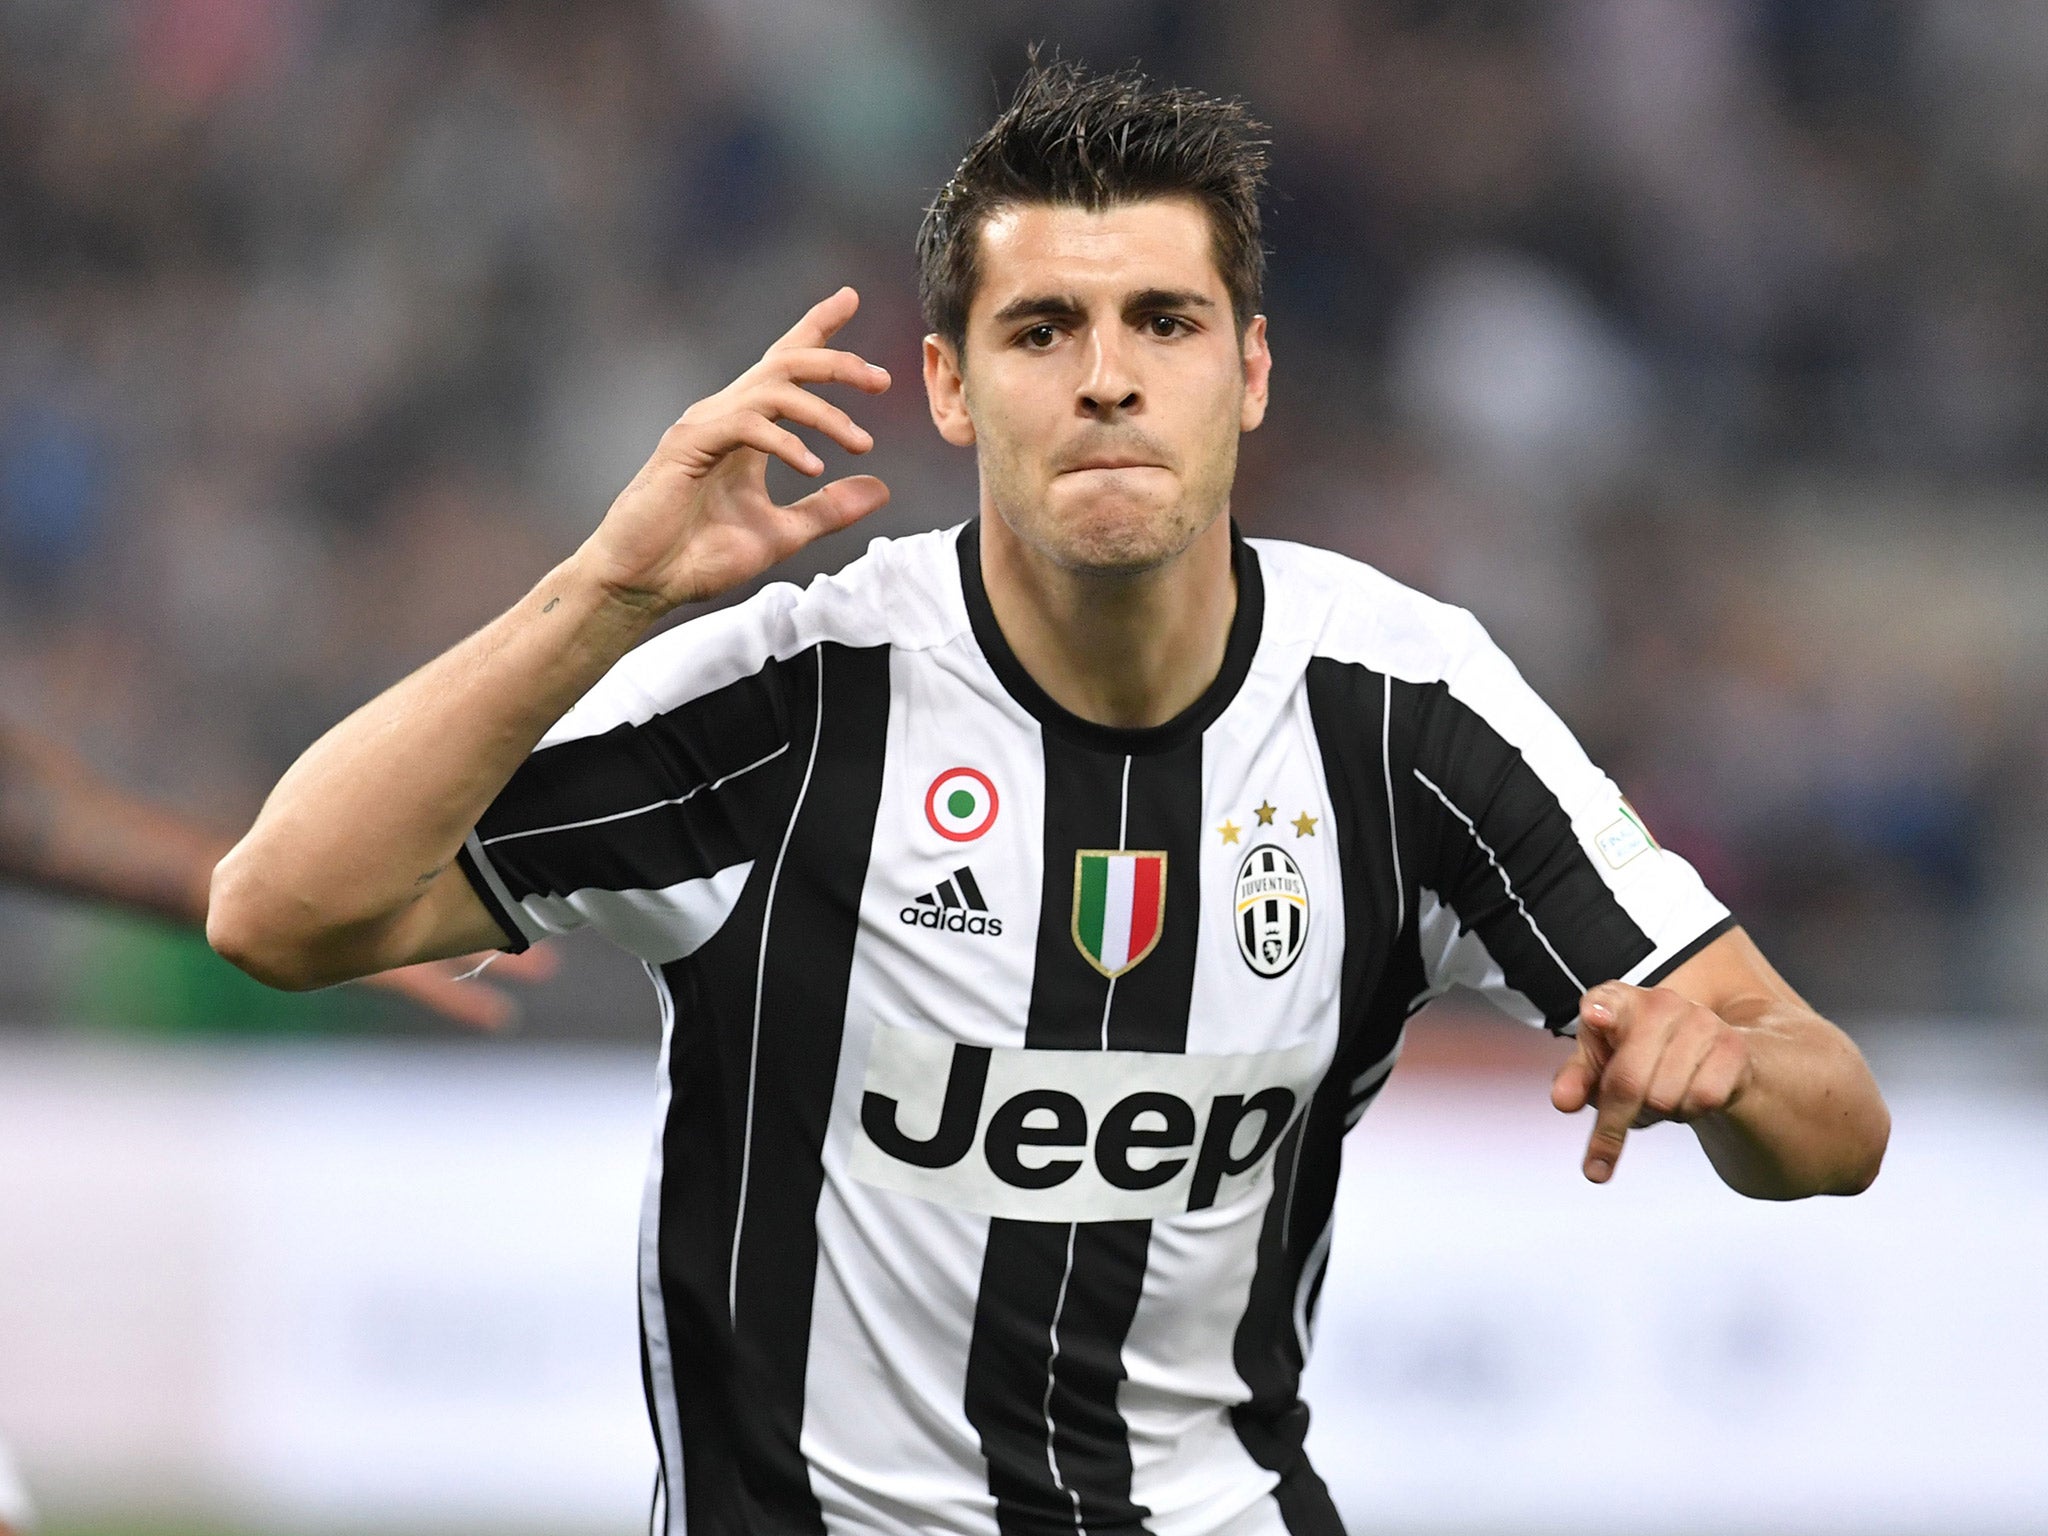 &#13;
Costa's Chelsea future could hinge on Morata's interest in joining Chelsea &#13;